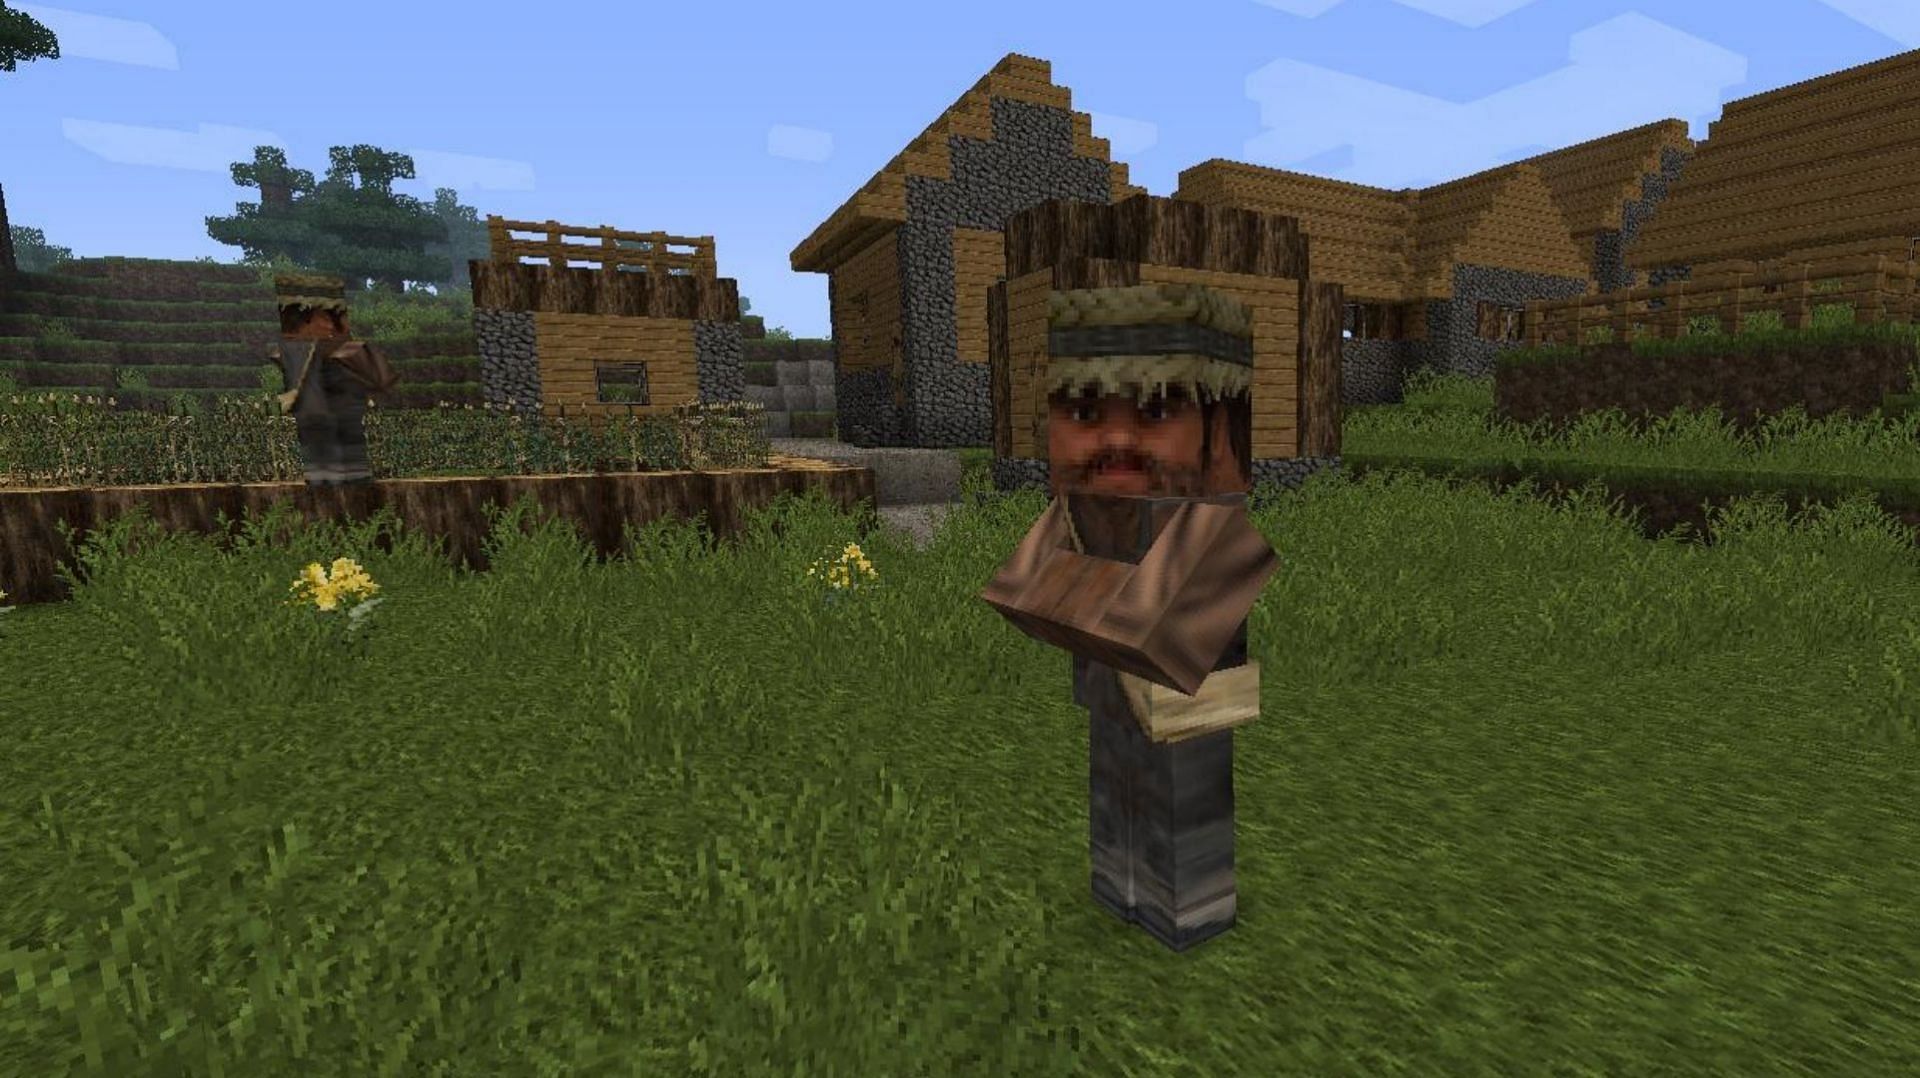 Although this texture pack makes mob textures quite realistic in Minecraft, they can look extremely uncanny (Image via mcpedl.com)